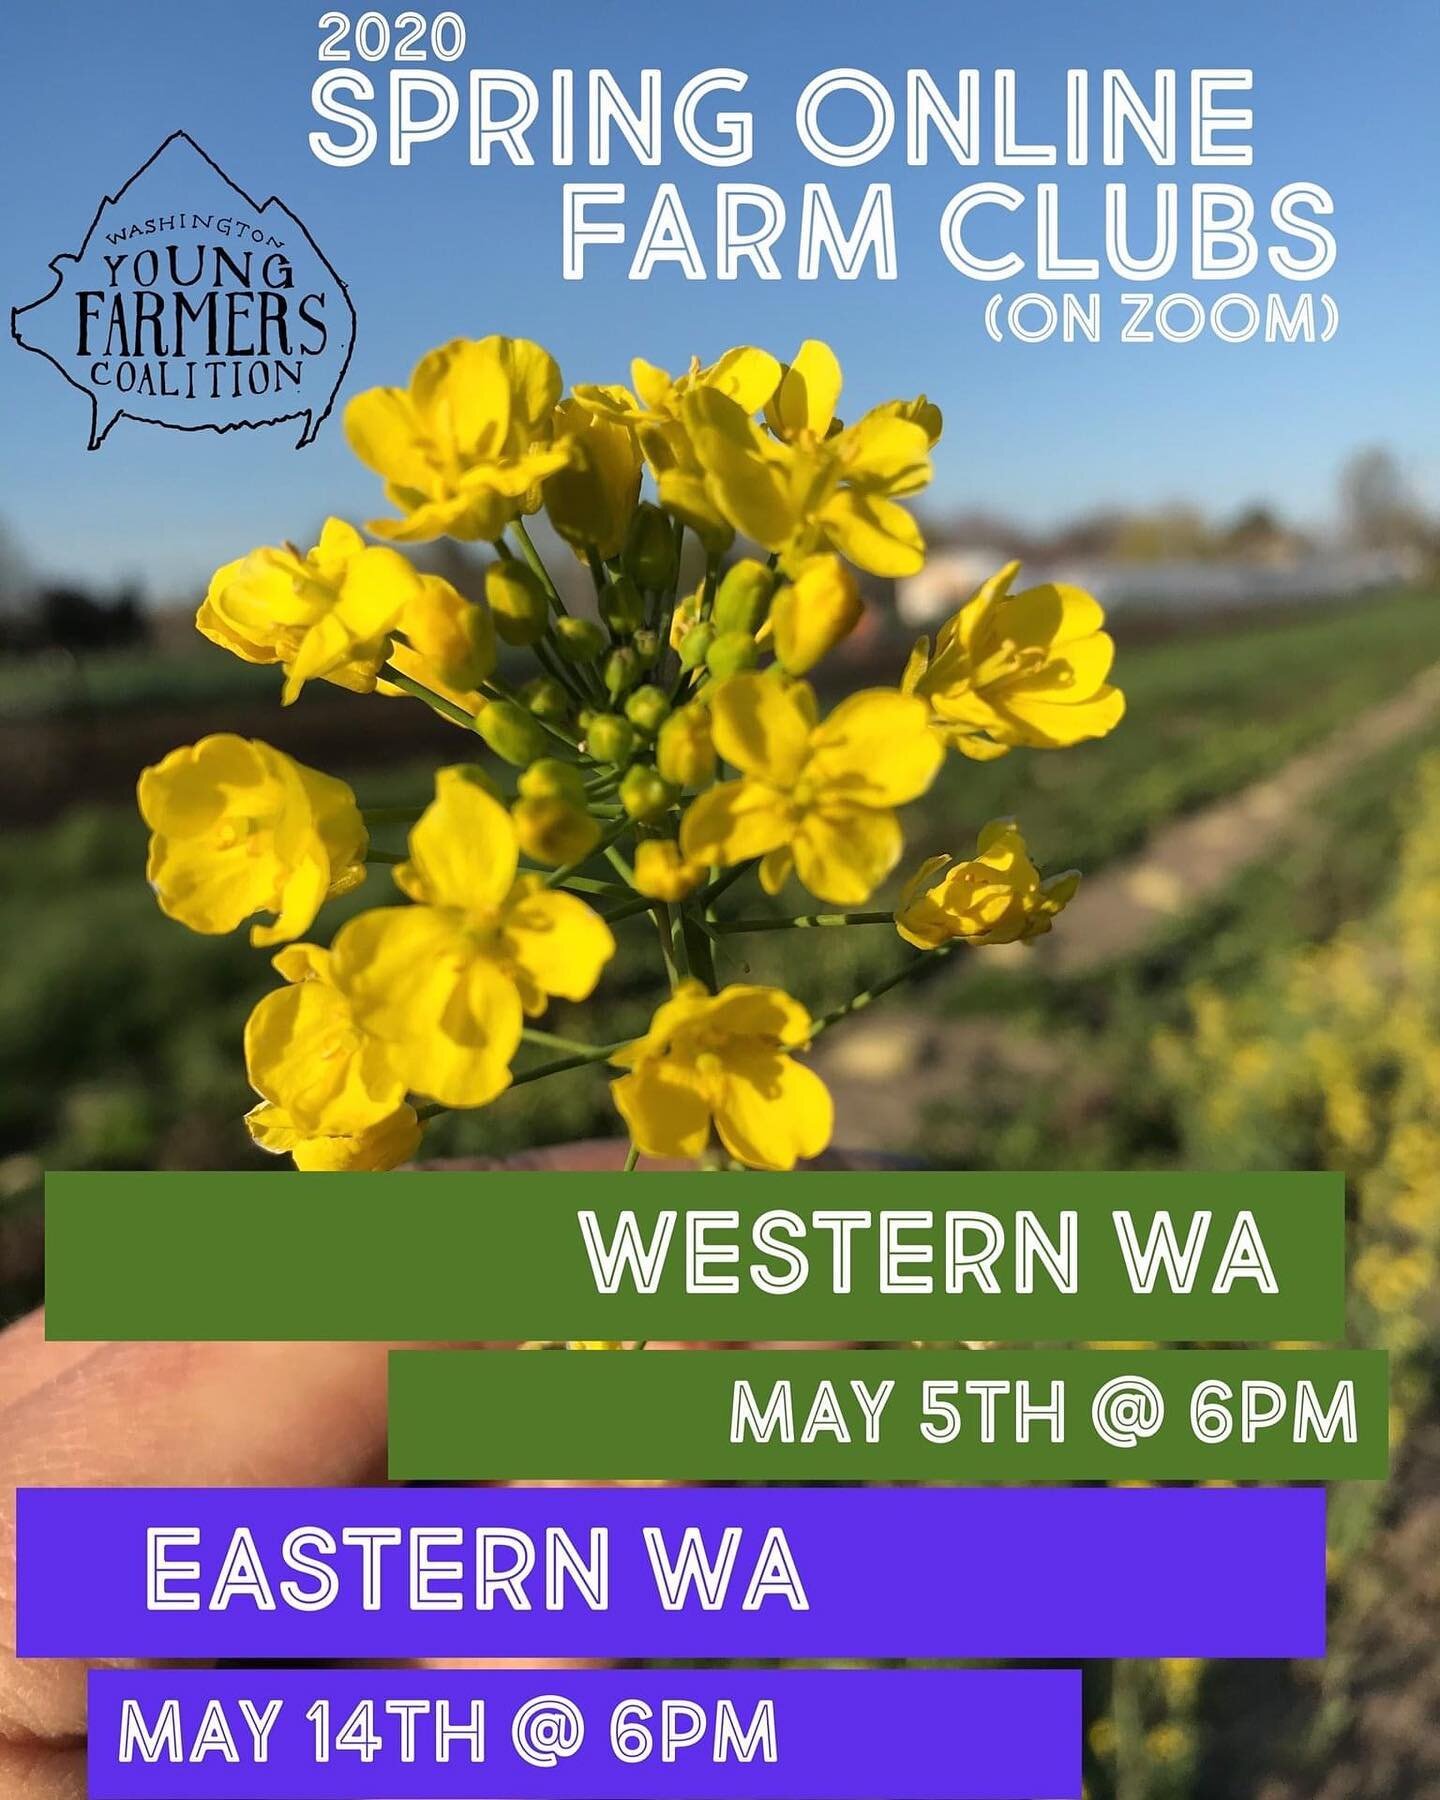 WA Young Farmers Coalition has a tradition of Farm Clubs where farmers and our farm crew members (and our families, friends, supporters) gather to socialize, exchange knowledge and hot takes, and discuss whatever we see fit! We'll be hosting two digi